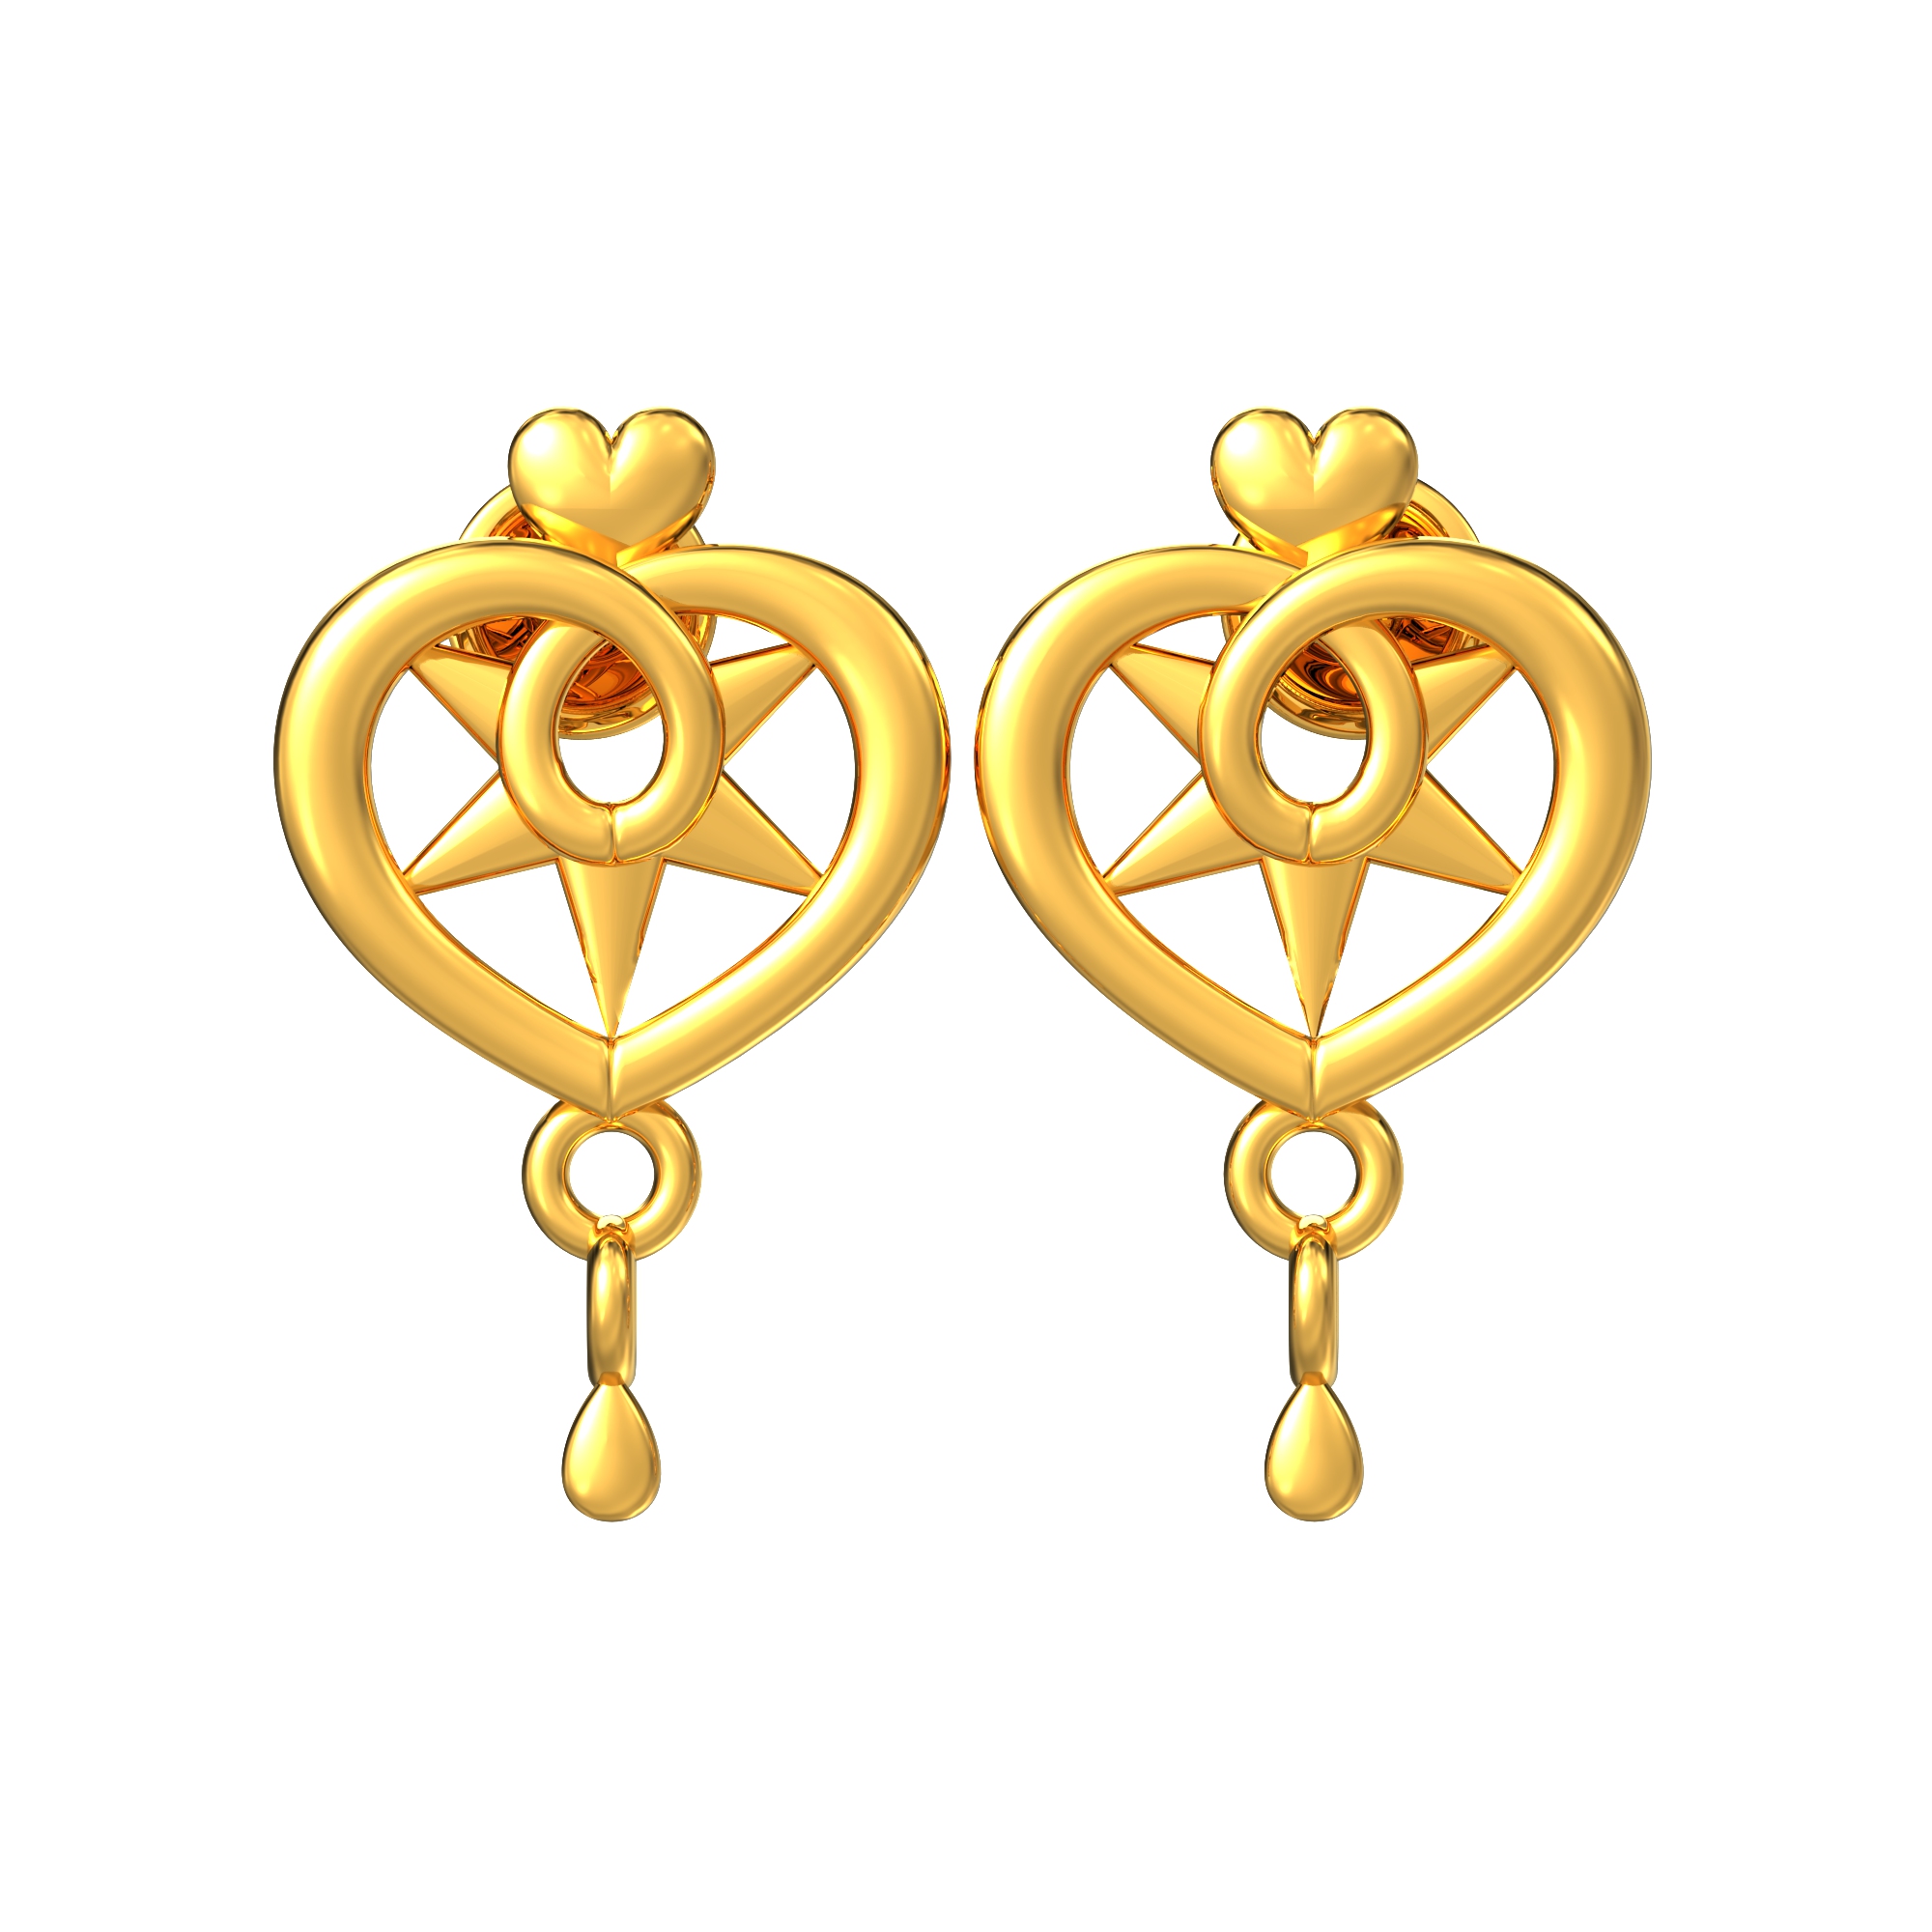 Wholesale gold jewellery manufacturers in Arumbakkam